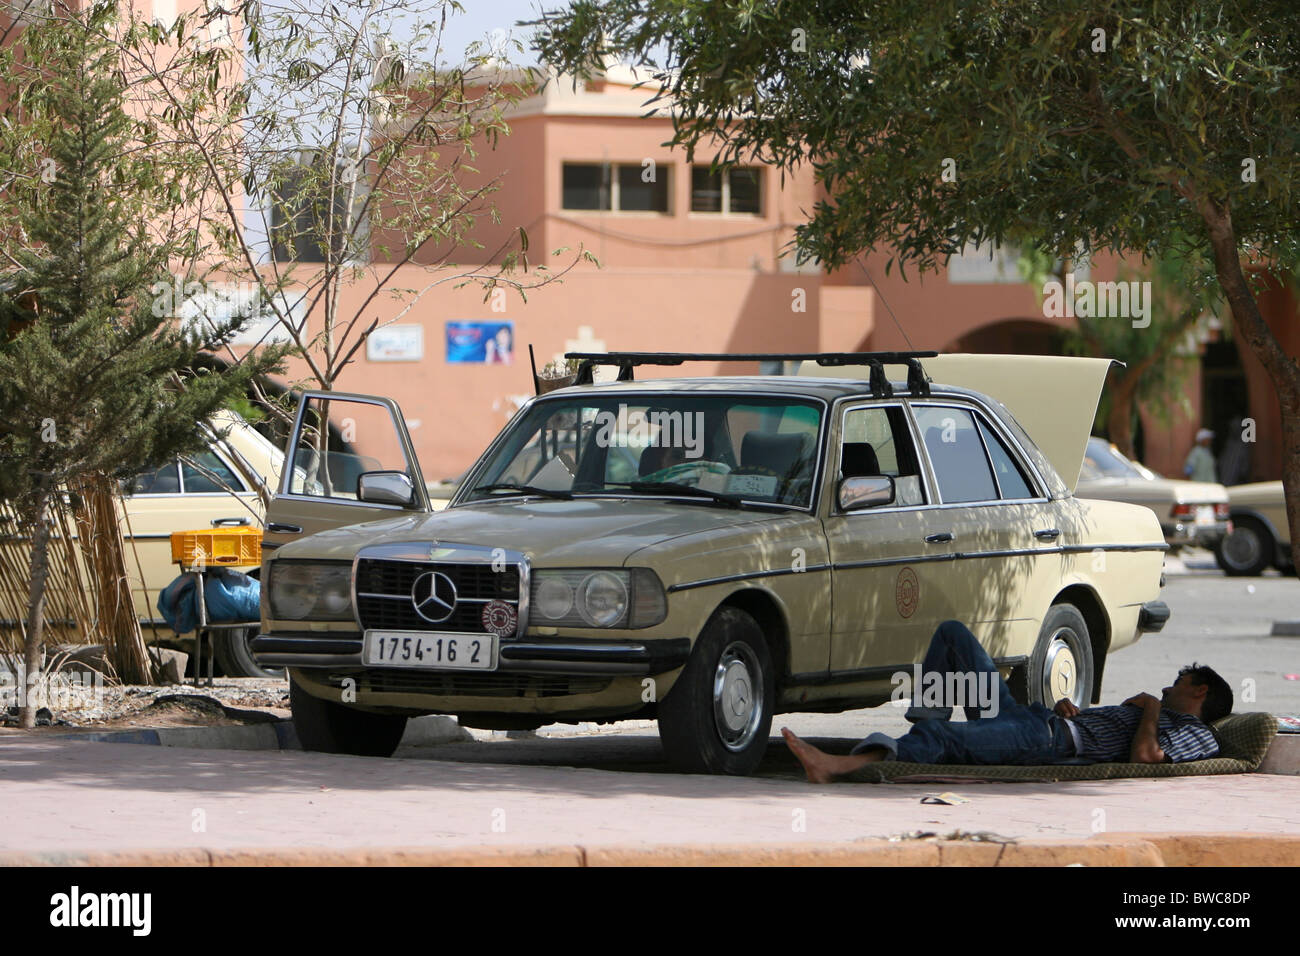 a-yellow-mercedes-benz-taxi-parked-in-the-shade-under-a-tree-in-the-BWC8DP.jpg